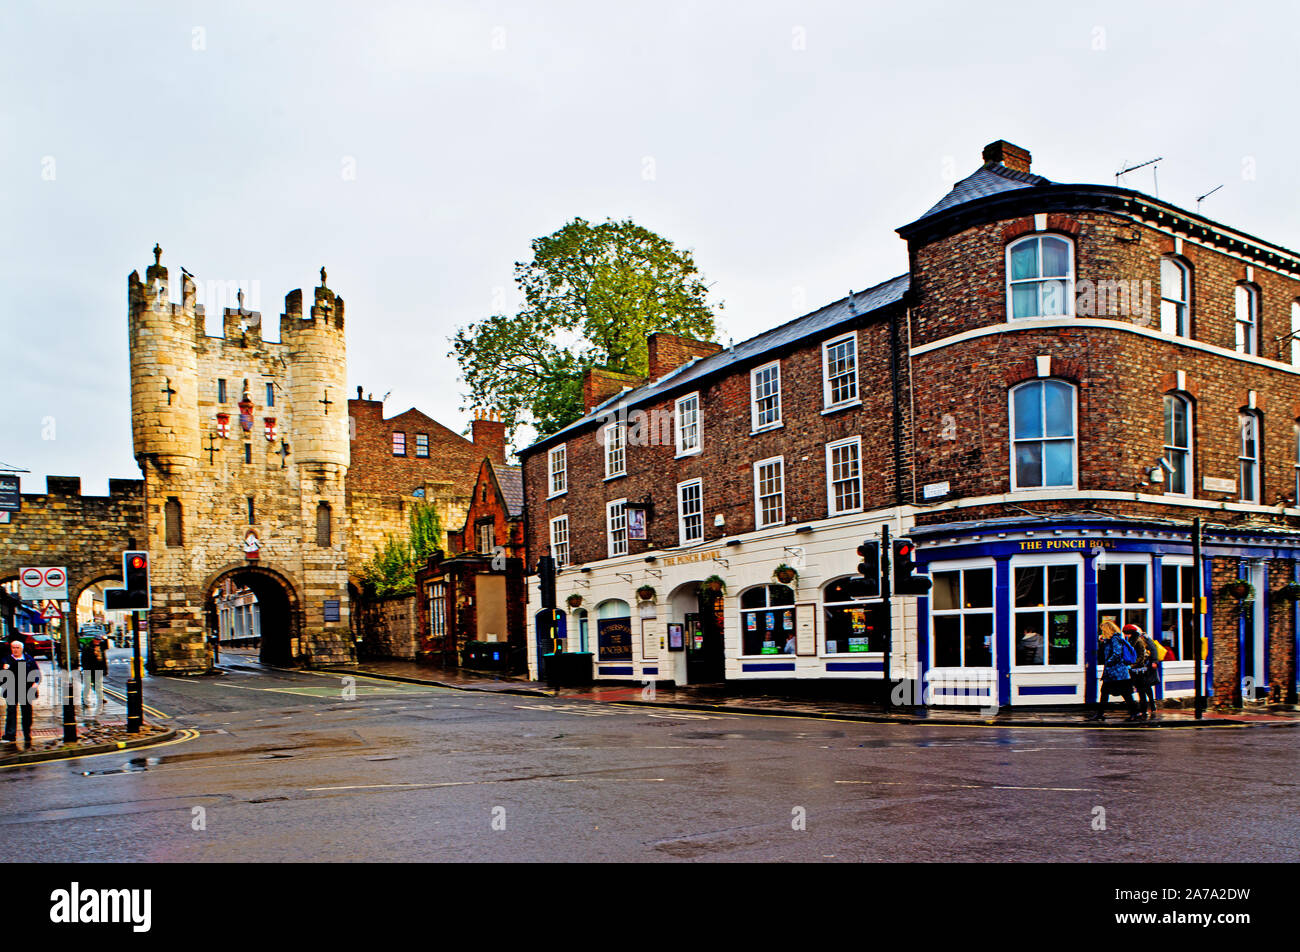 Mickelgate and the Punch Bowl Inn, York, England Stock Photo